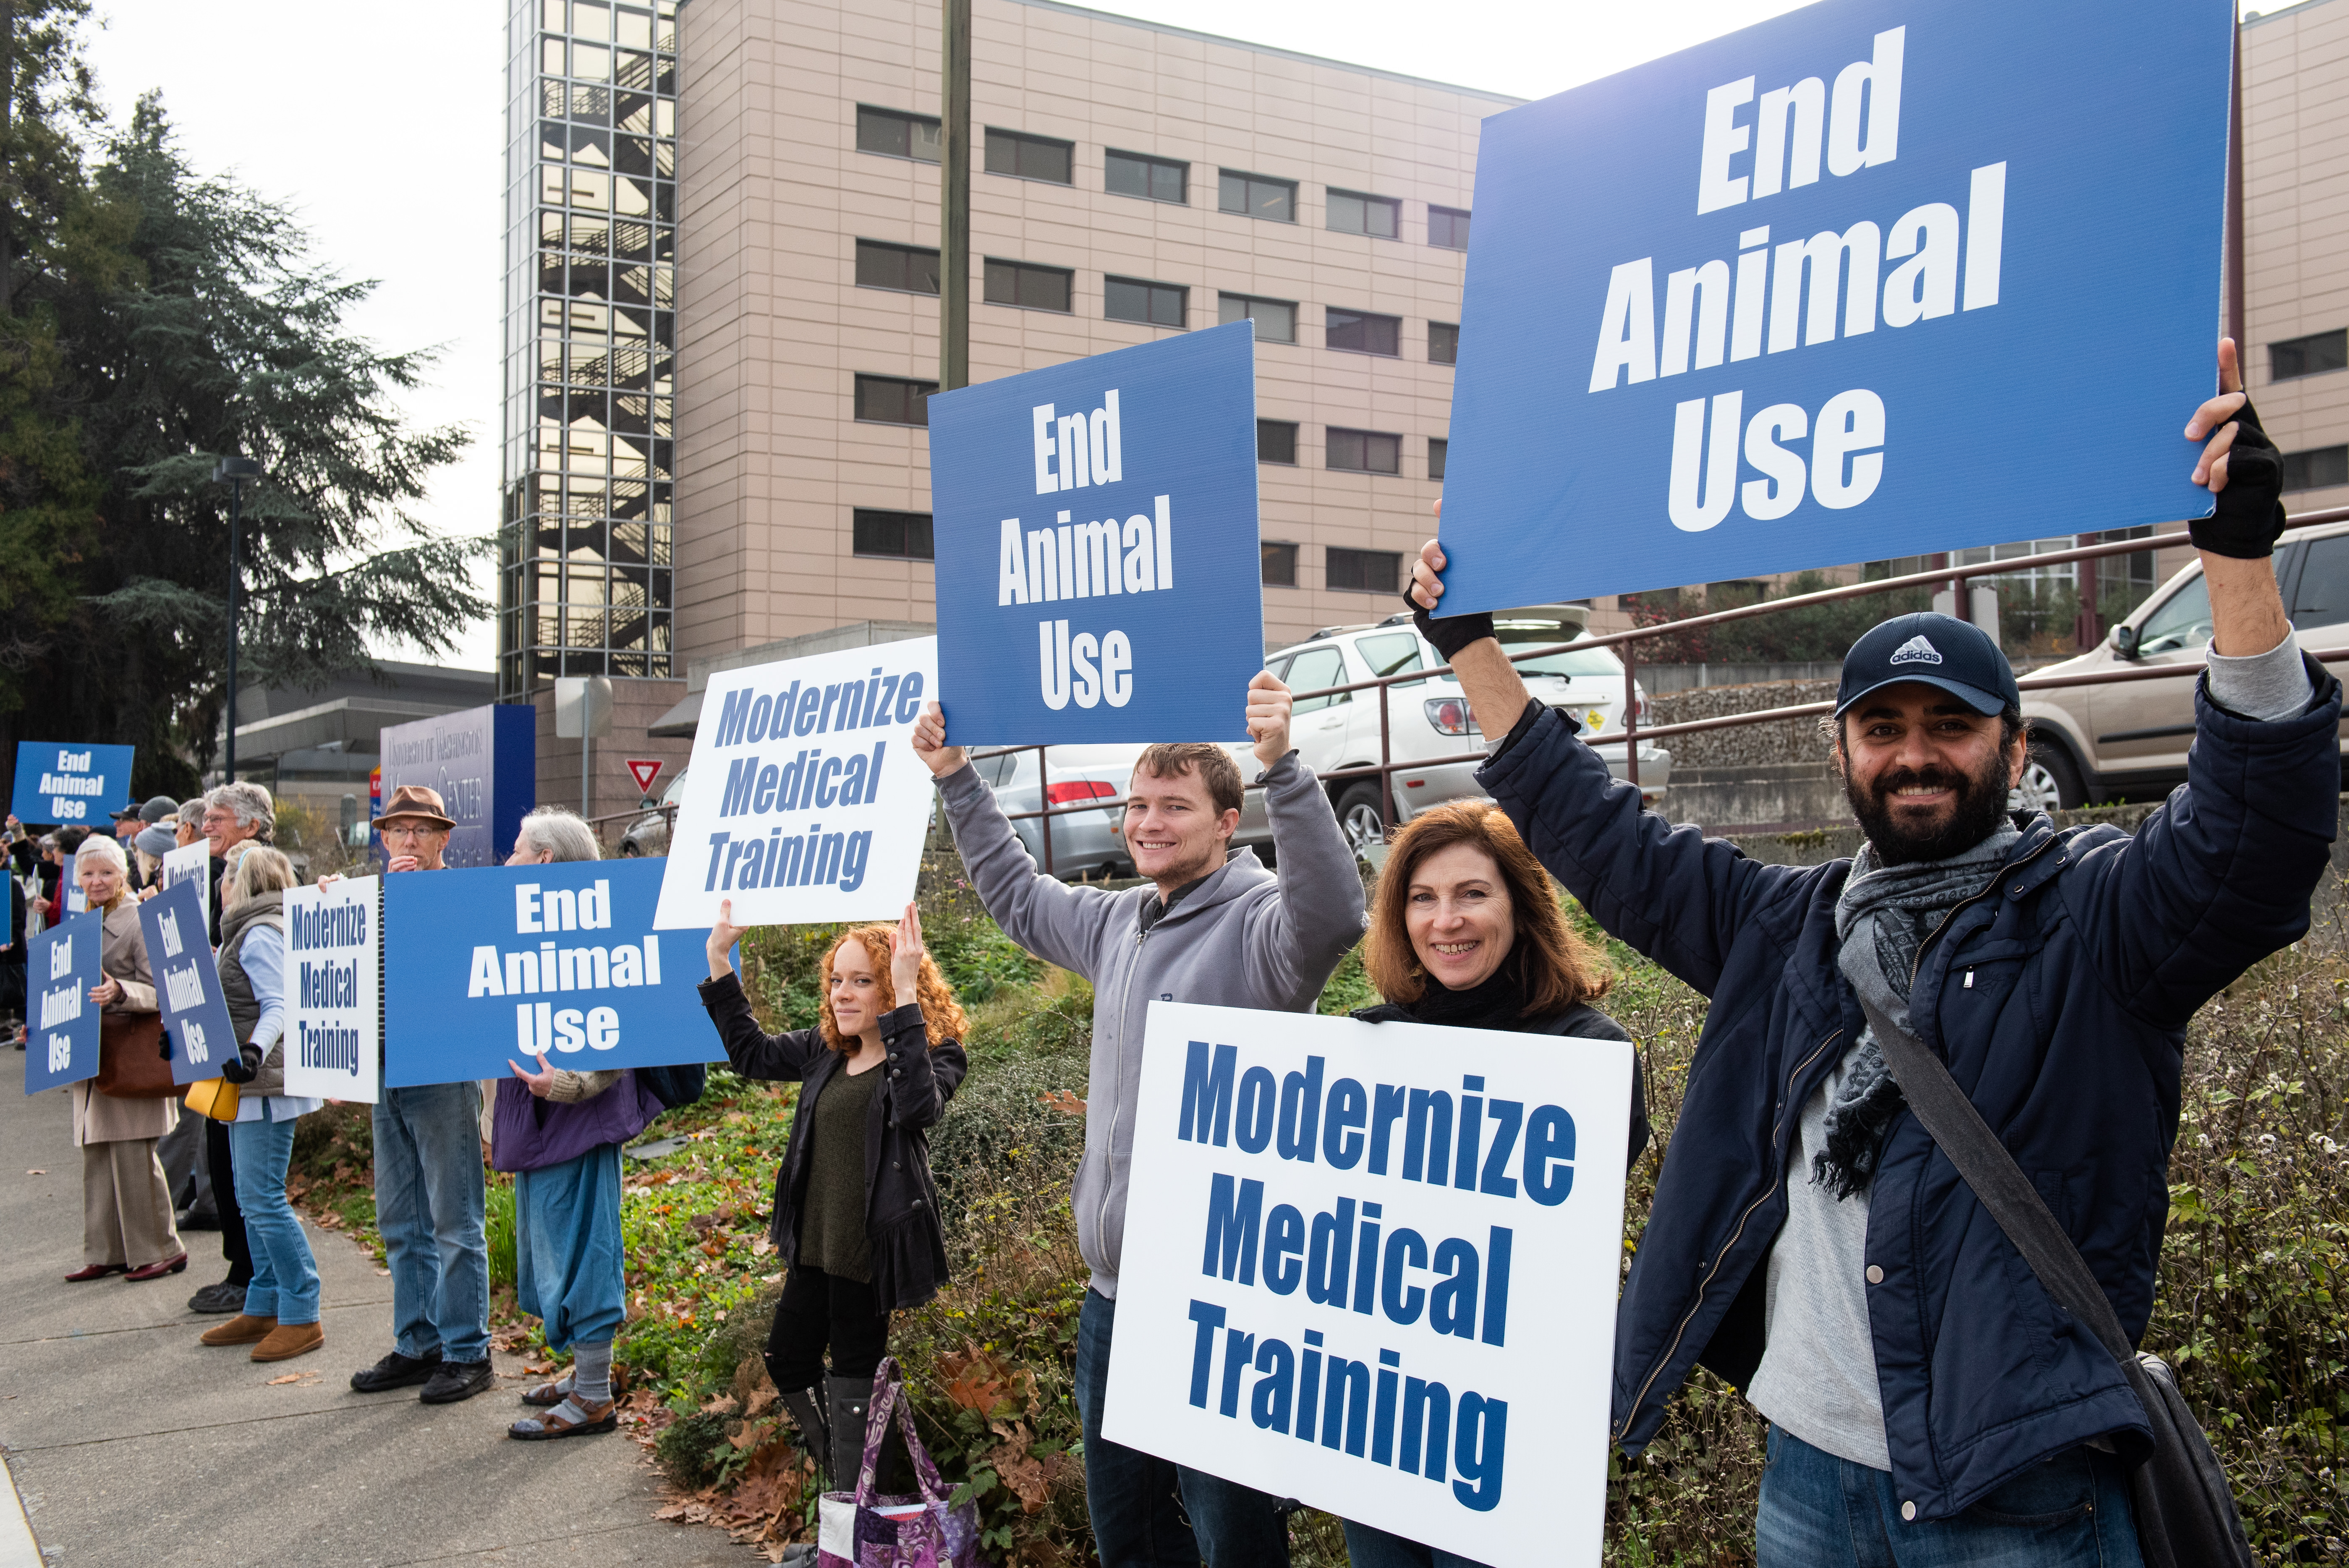 Demonstration at University of Colorado to Save Animals